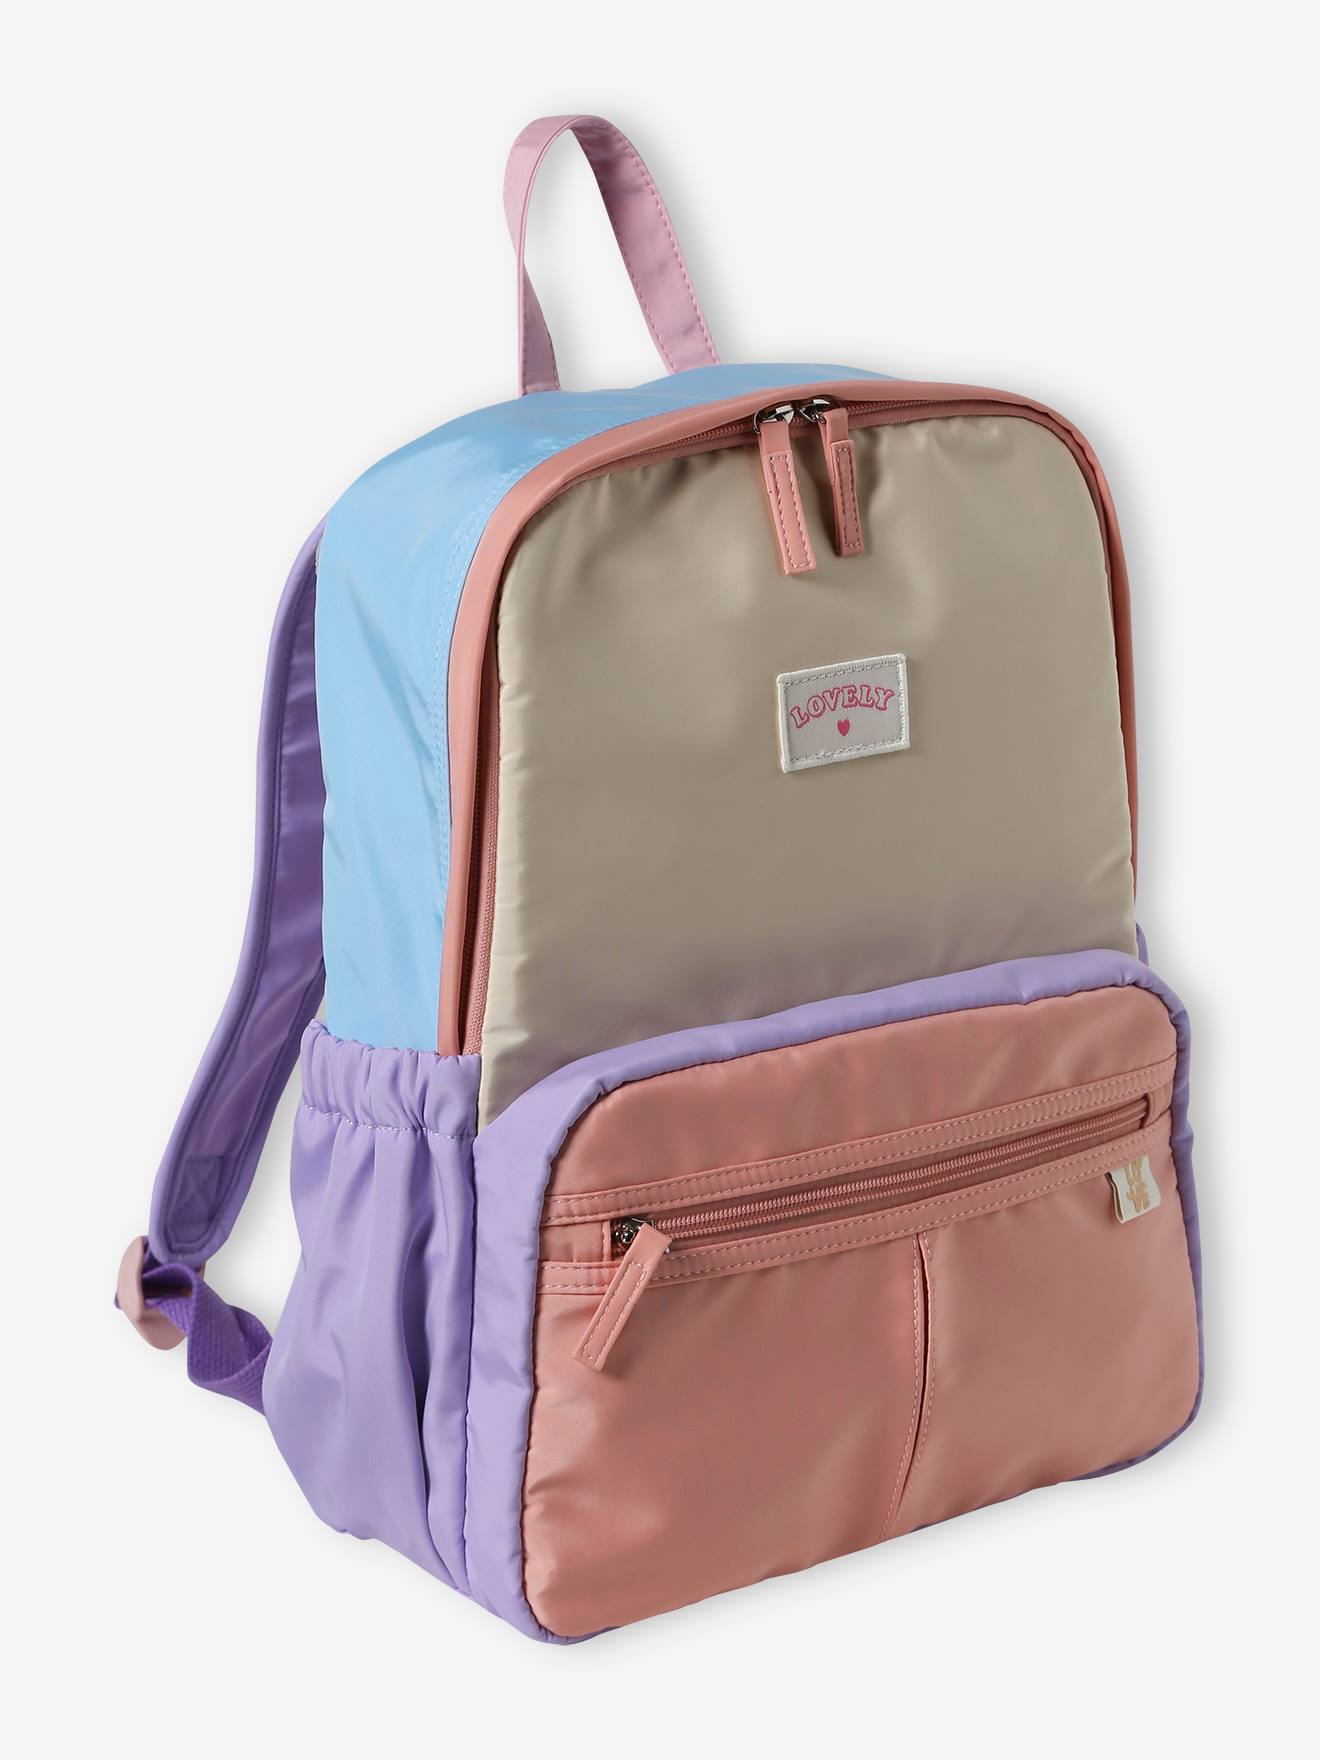 Retro Colourblock Backpack for Girls lilac